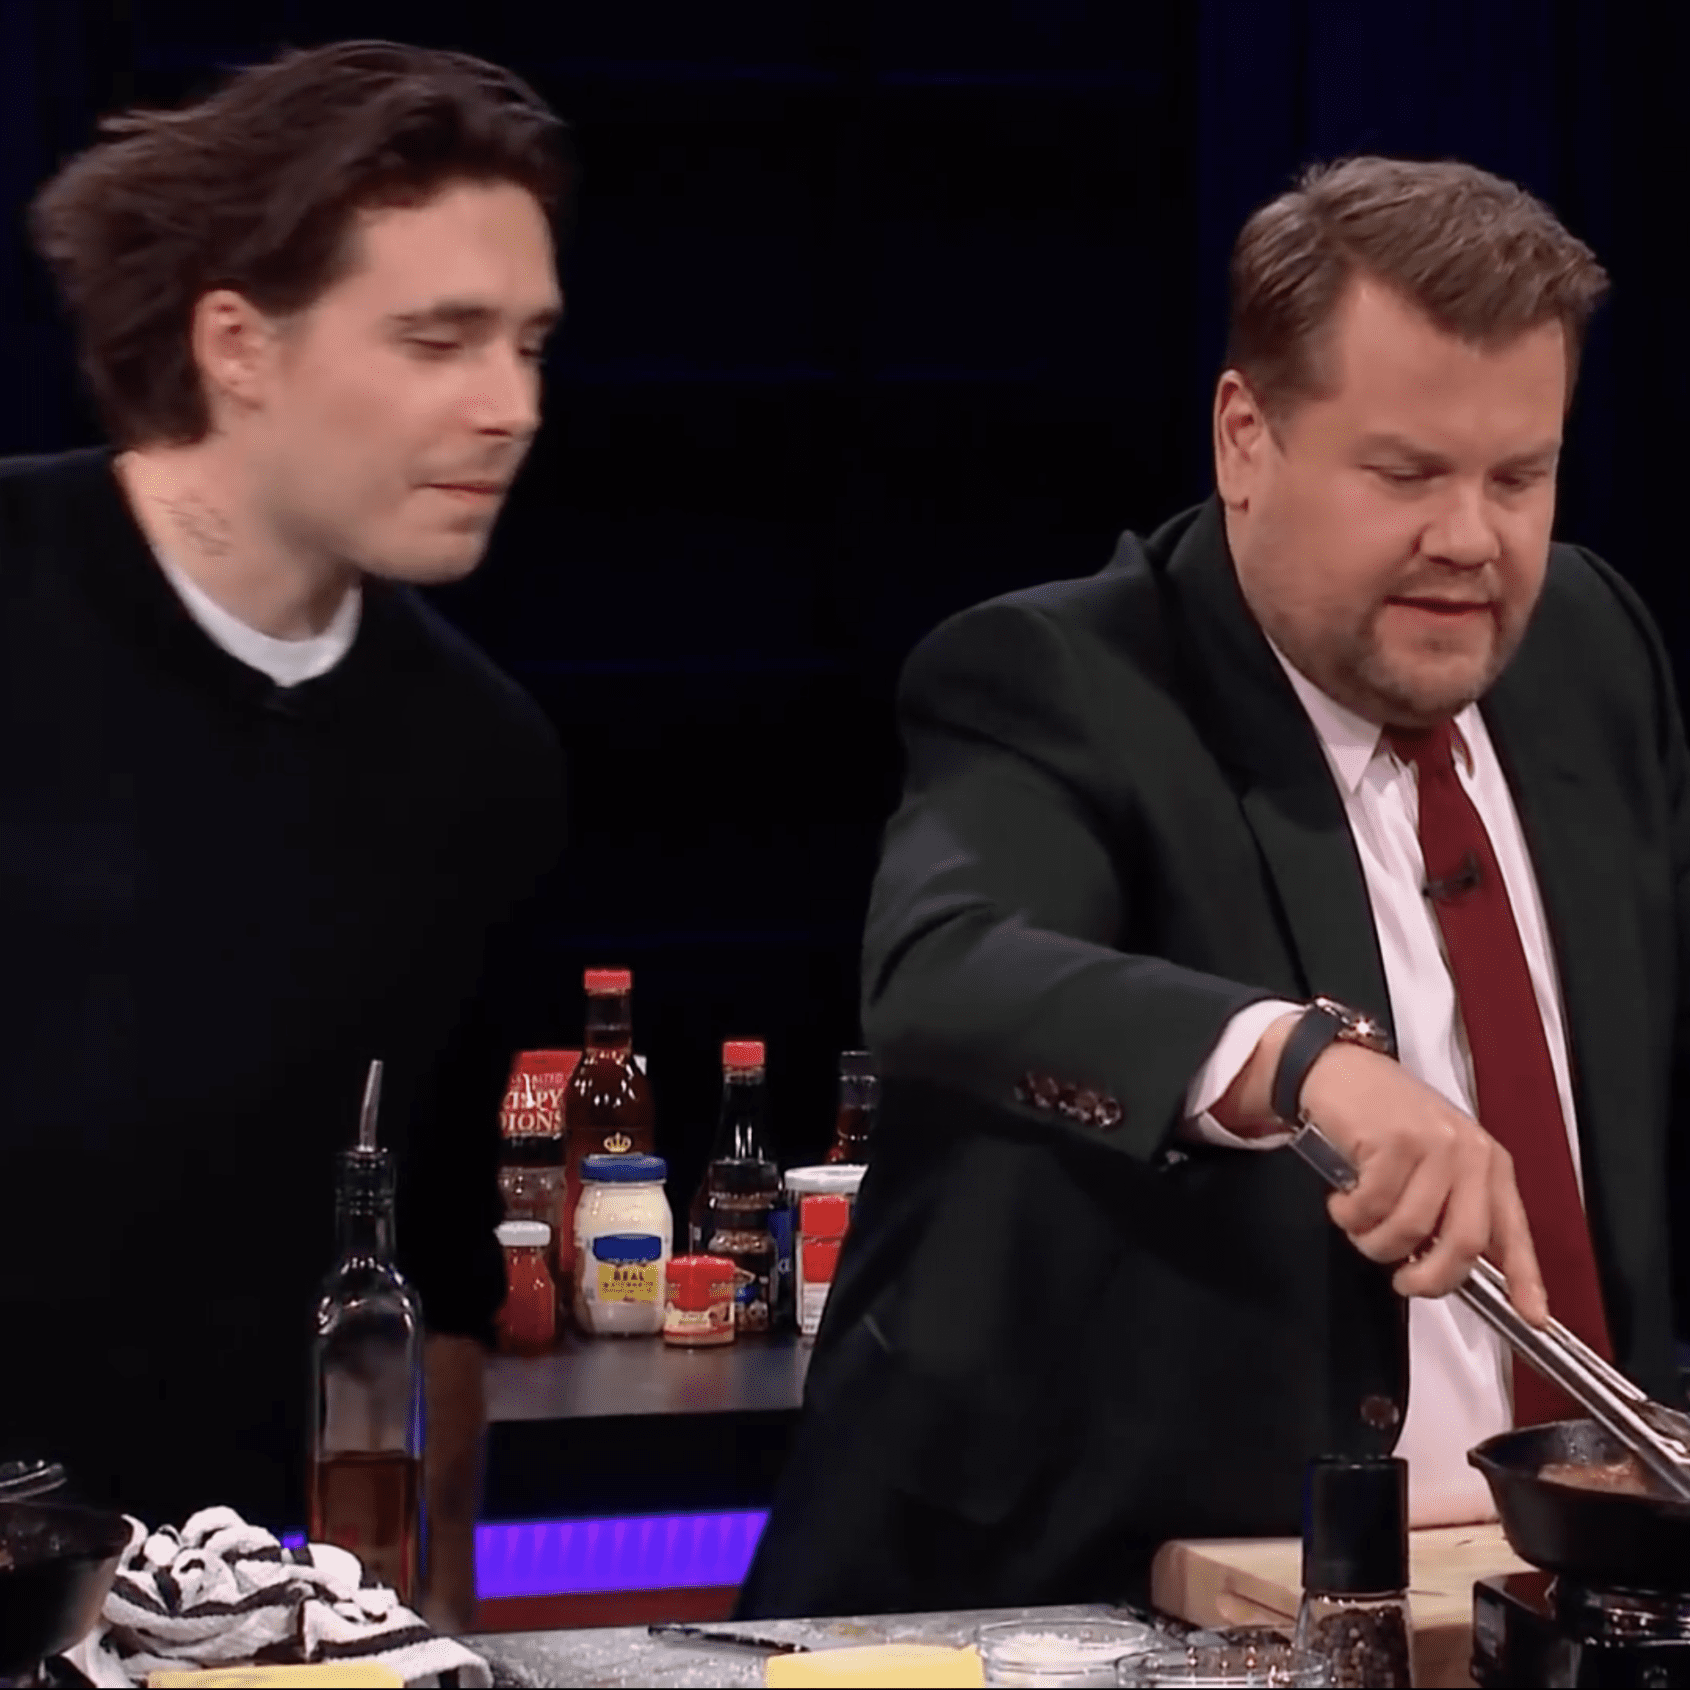 It’s Nautilus vs Aquanaut as Brooklyn Beckham & James Corden have a steak / frites cook-off while wearing Pateks